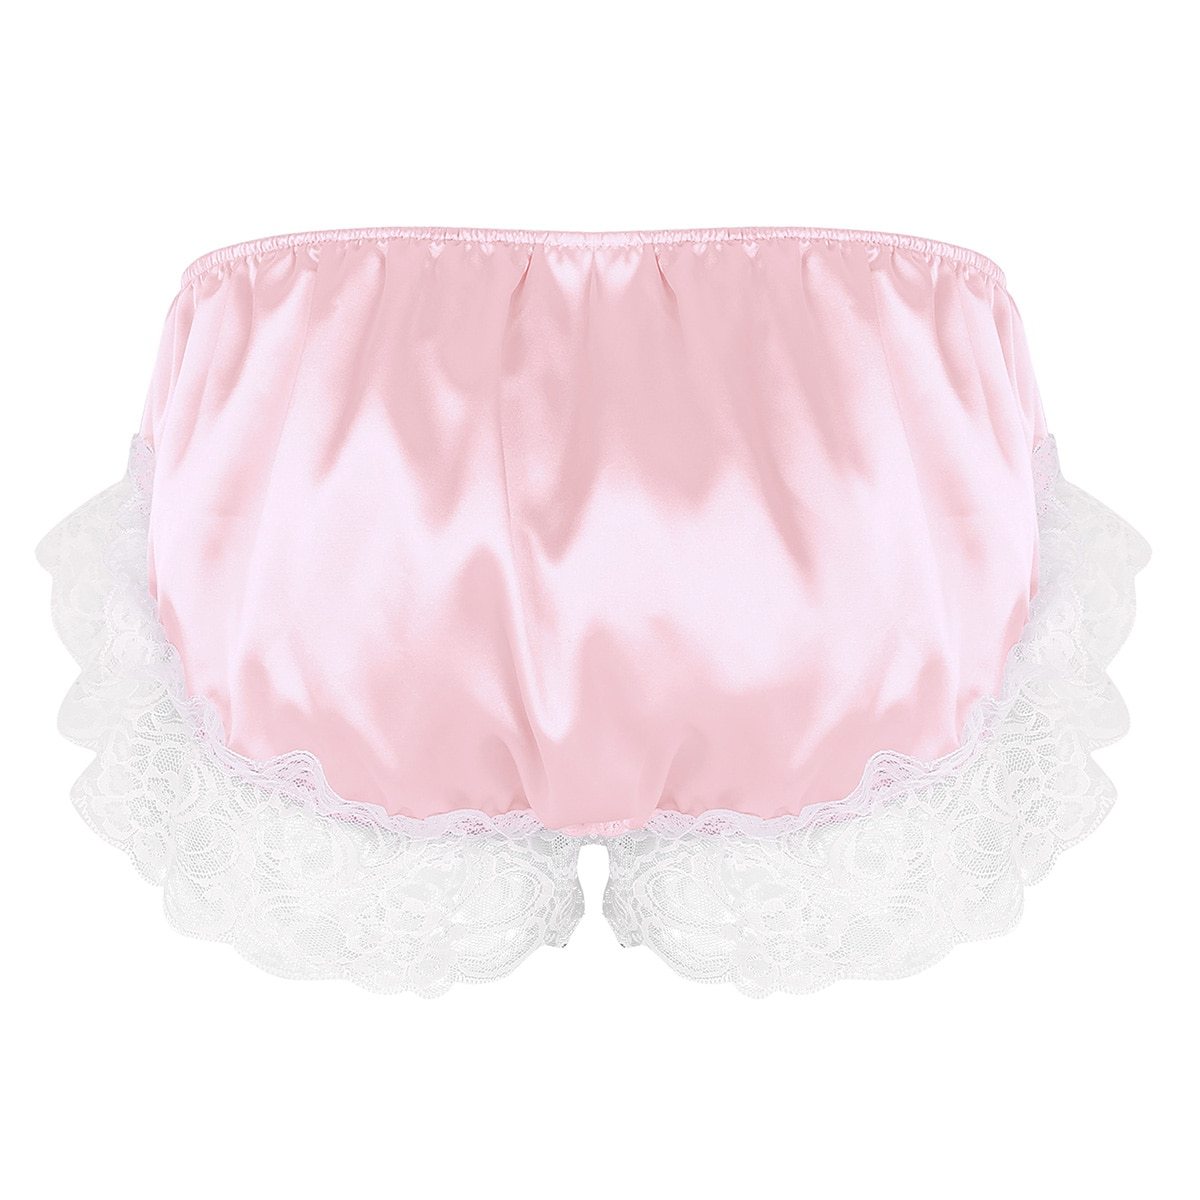 Mens Feminine Shiny Soft Ruffled Floral Sissy Panties with Lace Trim - White or Light Blue